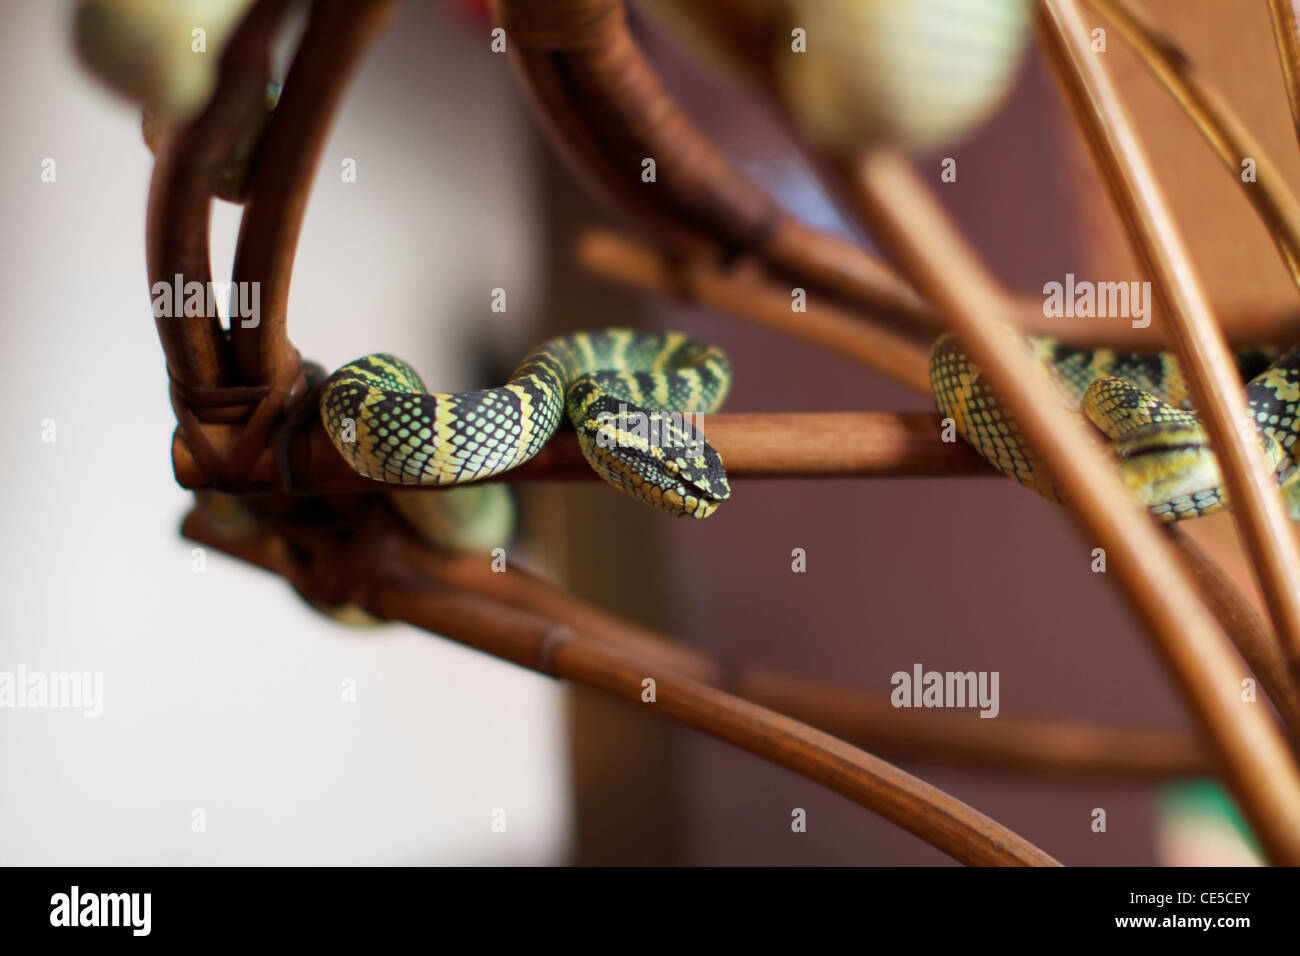 Pit vipers in the Snake Temple of Azure Cloud, Bayan Lepas, Penang, Malaysia Stock Photo